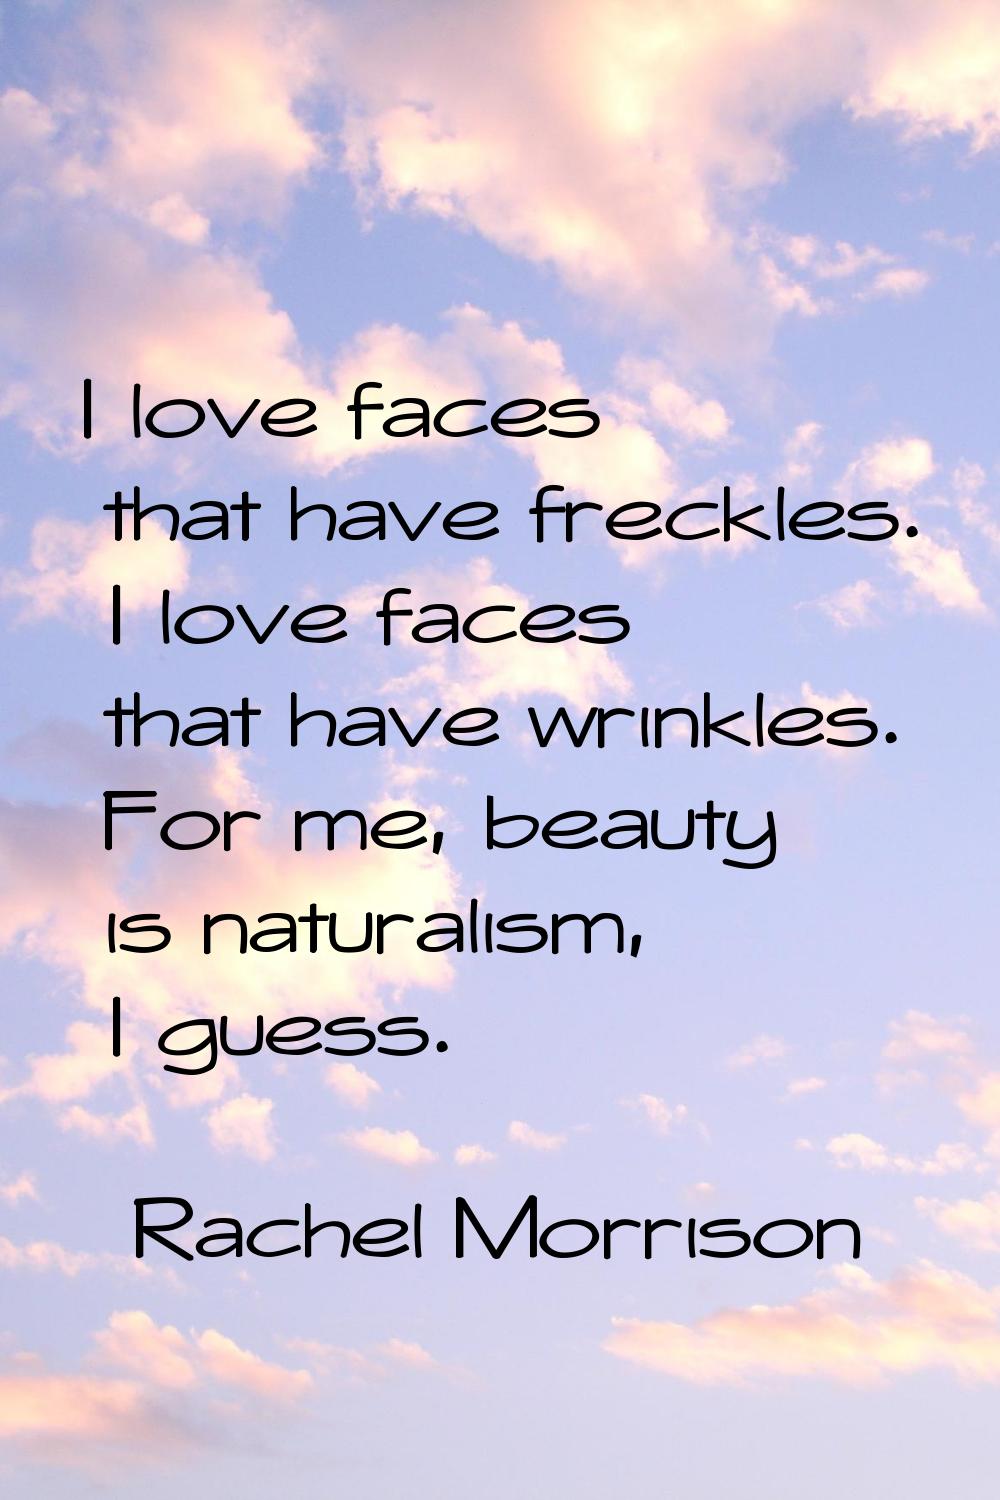 I love faces that have freckles. I love faces that have wrinkles. For me, beauty is naturalism, I g